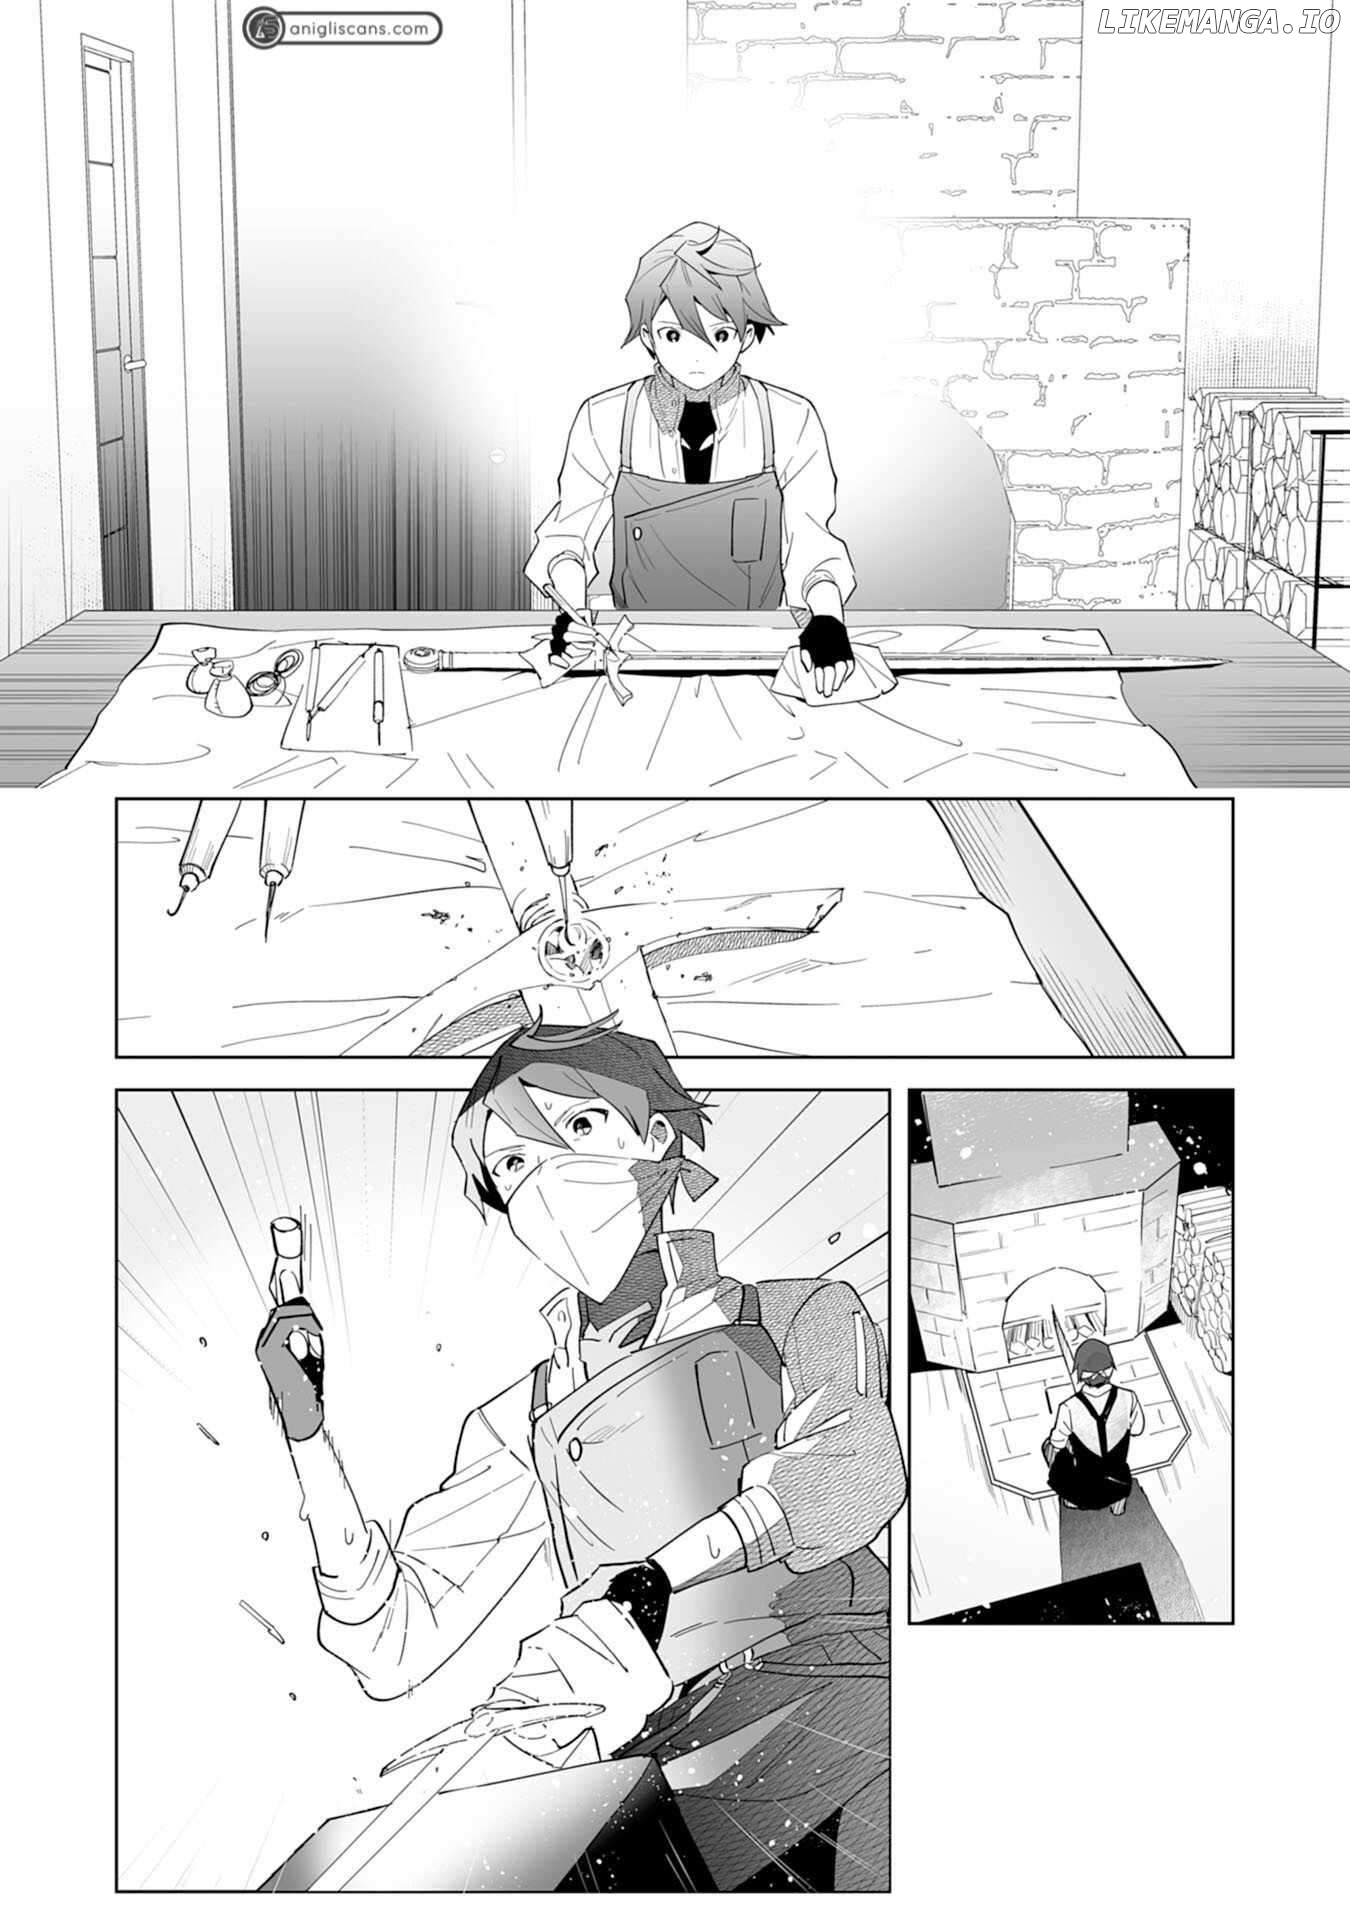 The ex-janitor who was expelled, became known as the "greatest repairman" with his exceptional skills - Requests from SSS rank parties and royalty don't stop coming Chapter 1 - page 20